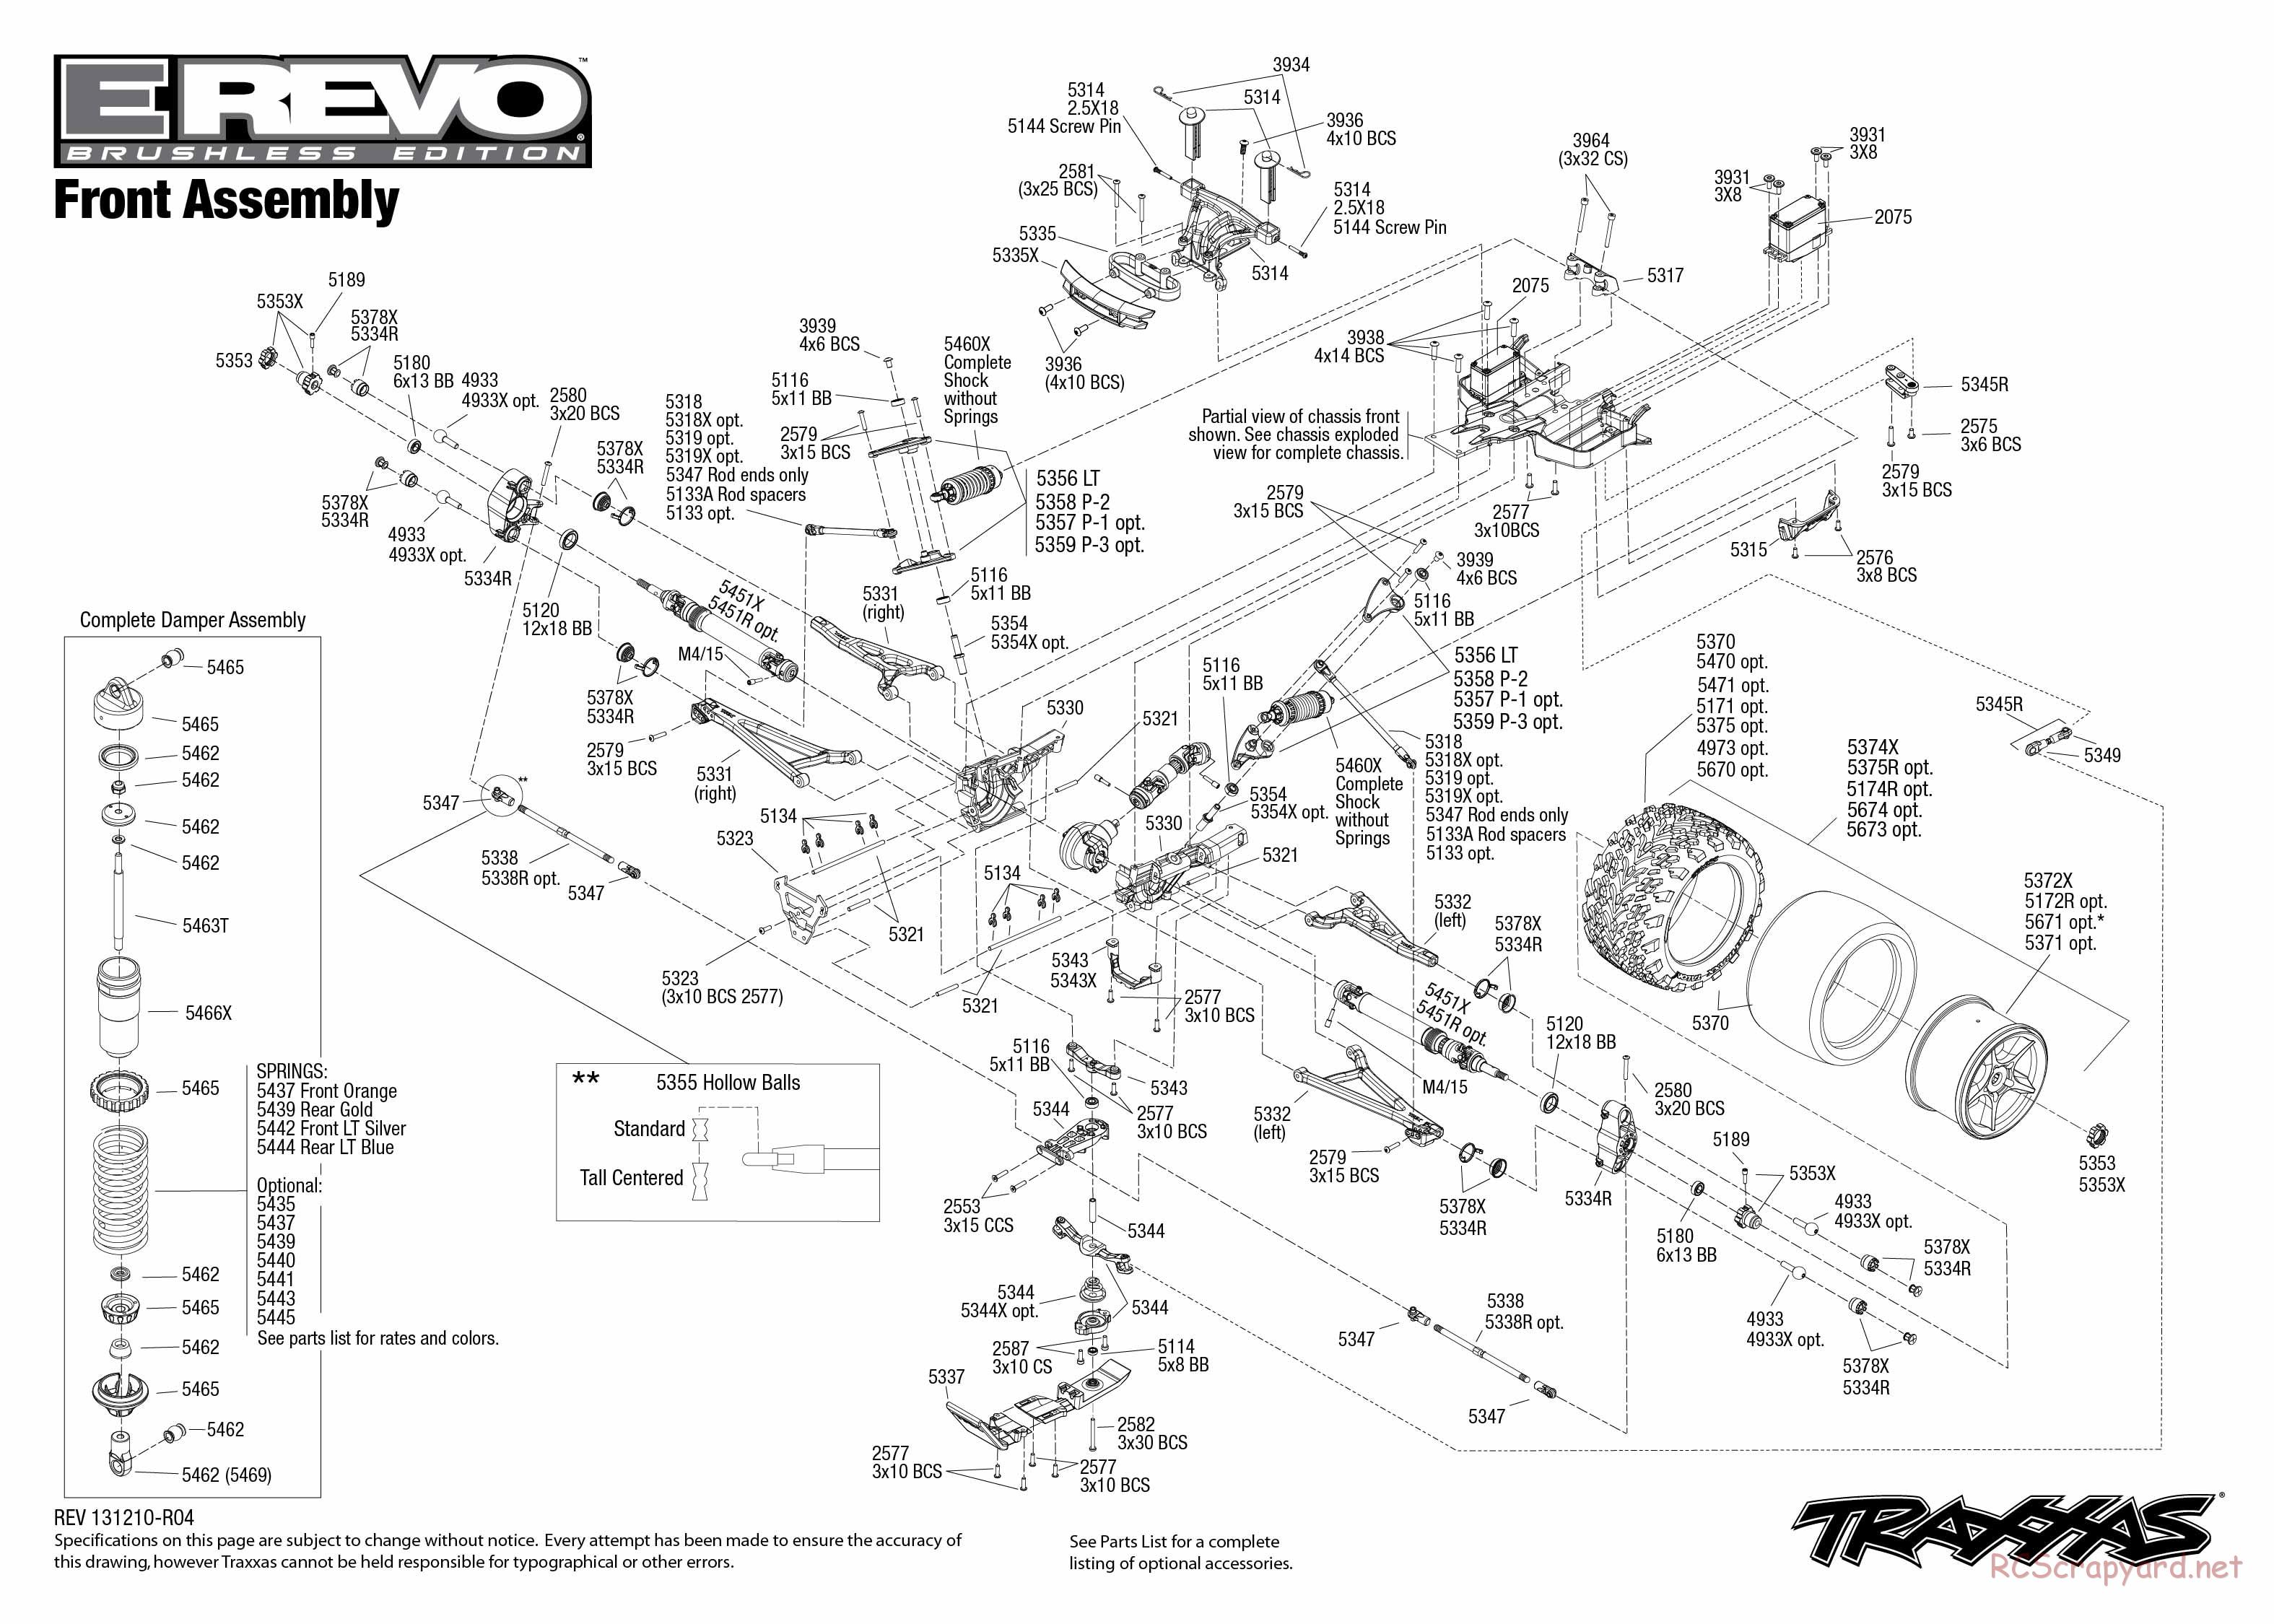 Traxxas - E-Revo Brushless (2009) - Exploded Views - Page 2